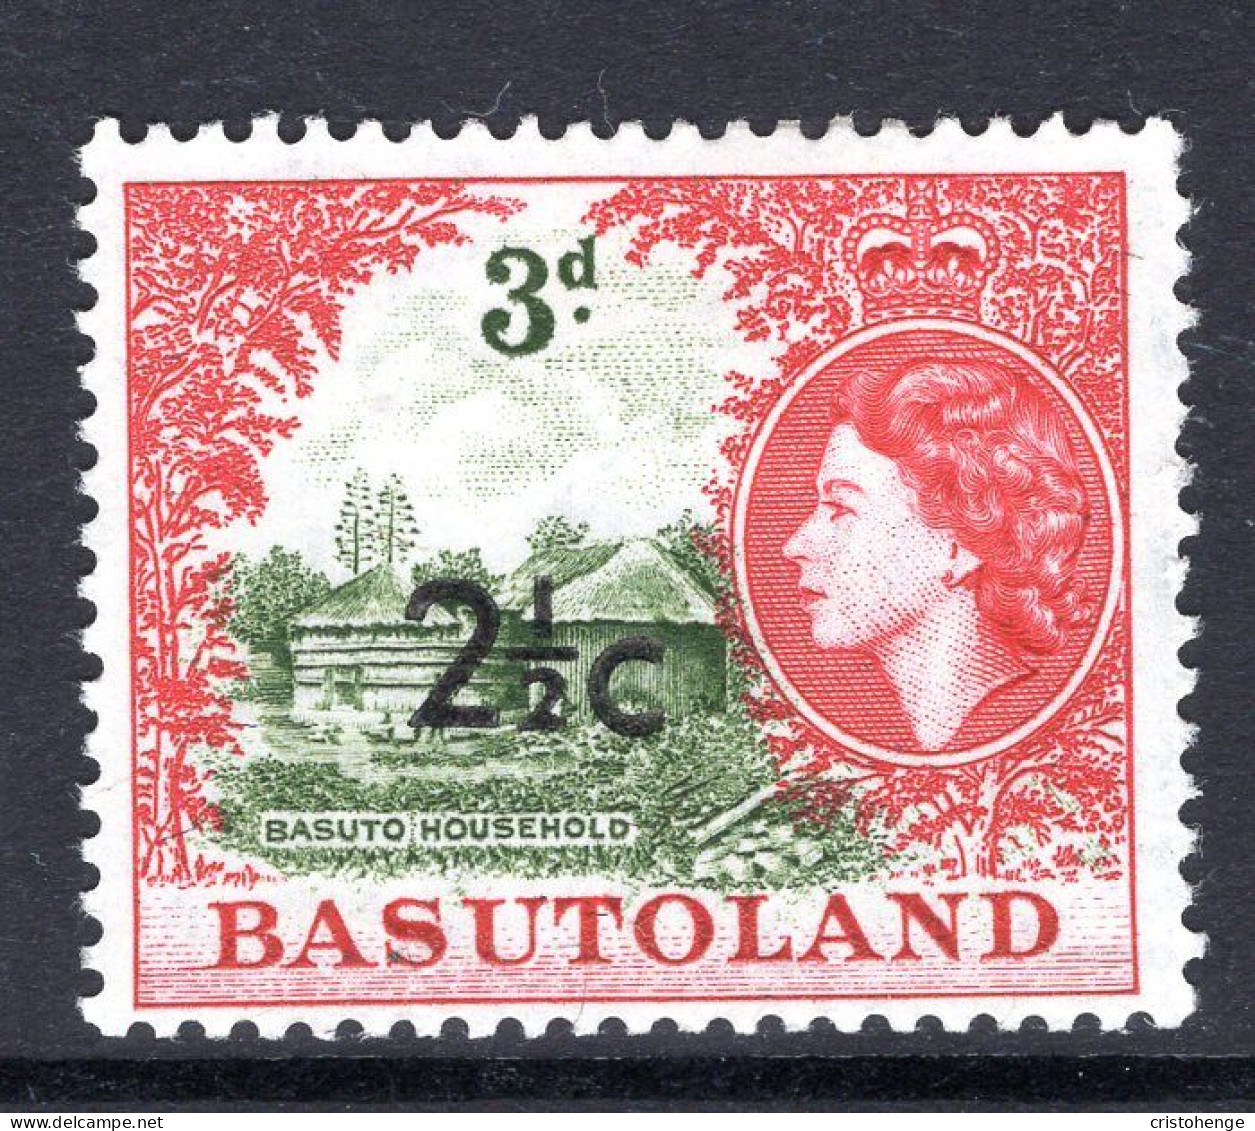 Basutoland 1961 Decimal Surcharges - 2½c On 3d Basuto Household - Type II - HM (SG 61a) - 1933-1964 Crown Colony